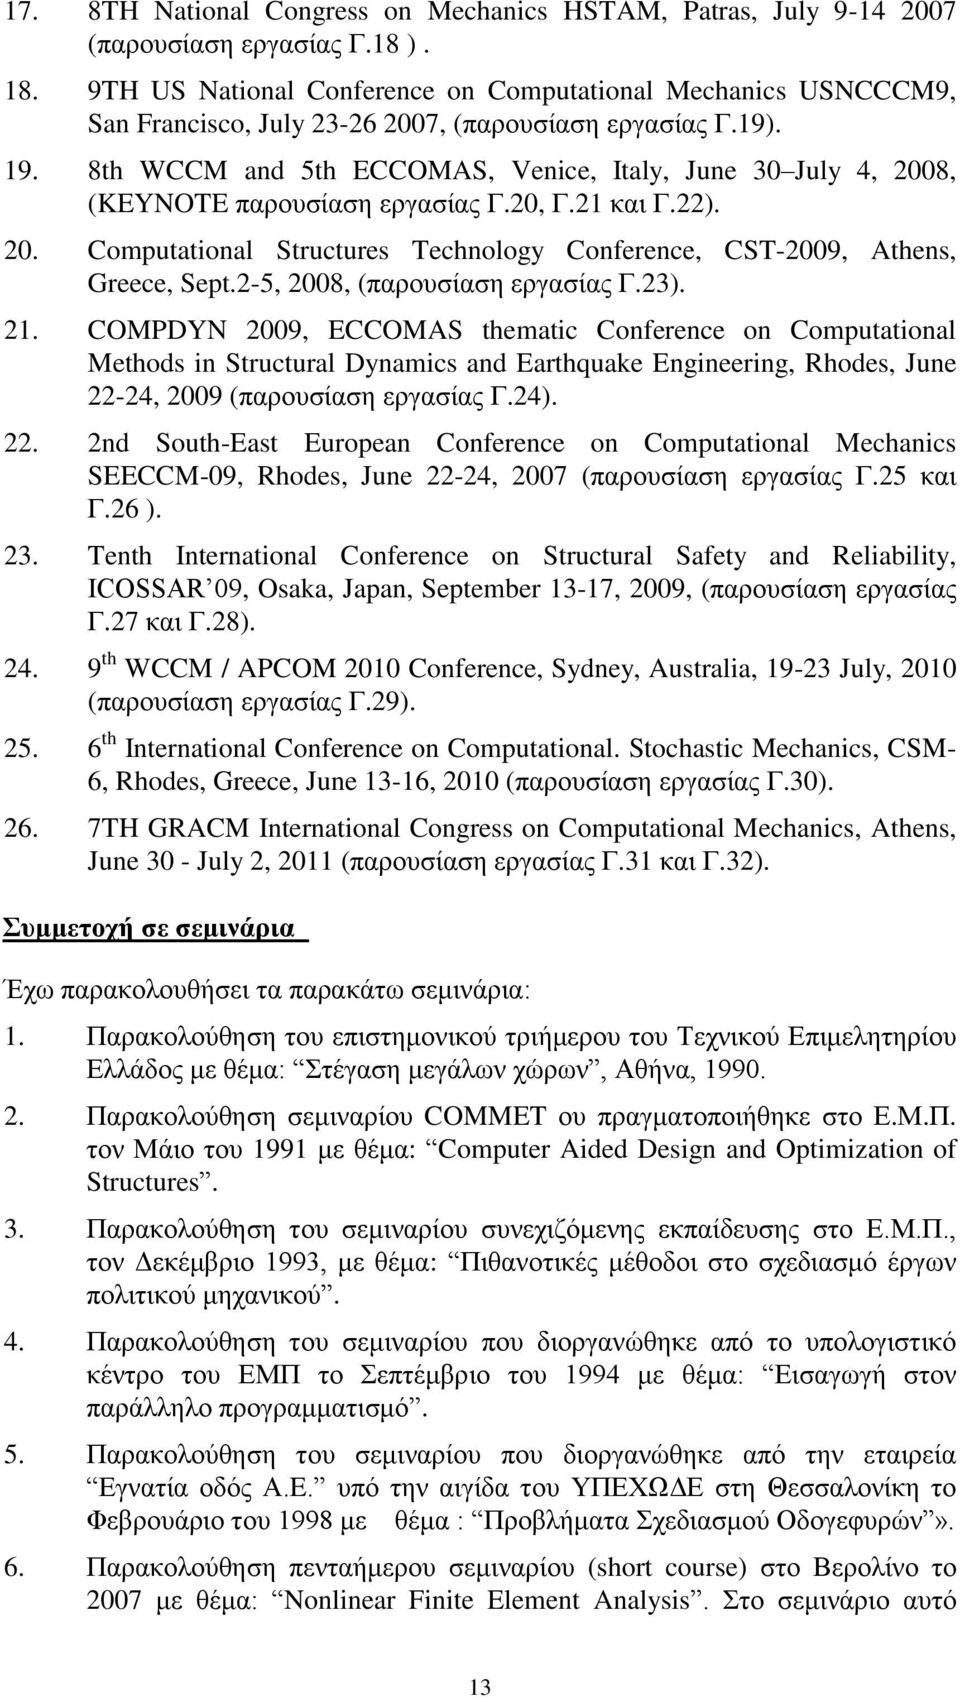 8th WCCM and 5th ECCOMAS, Venice, Italy, June 30 July 4, 2008, (KEYNOTE παρουσίαση εργασίας Γ.20, Γ.21 και Γ.22). 20. Computational Structures Technology Conference, CST-2009, Athens, Greece, Sept.